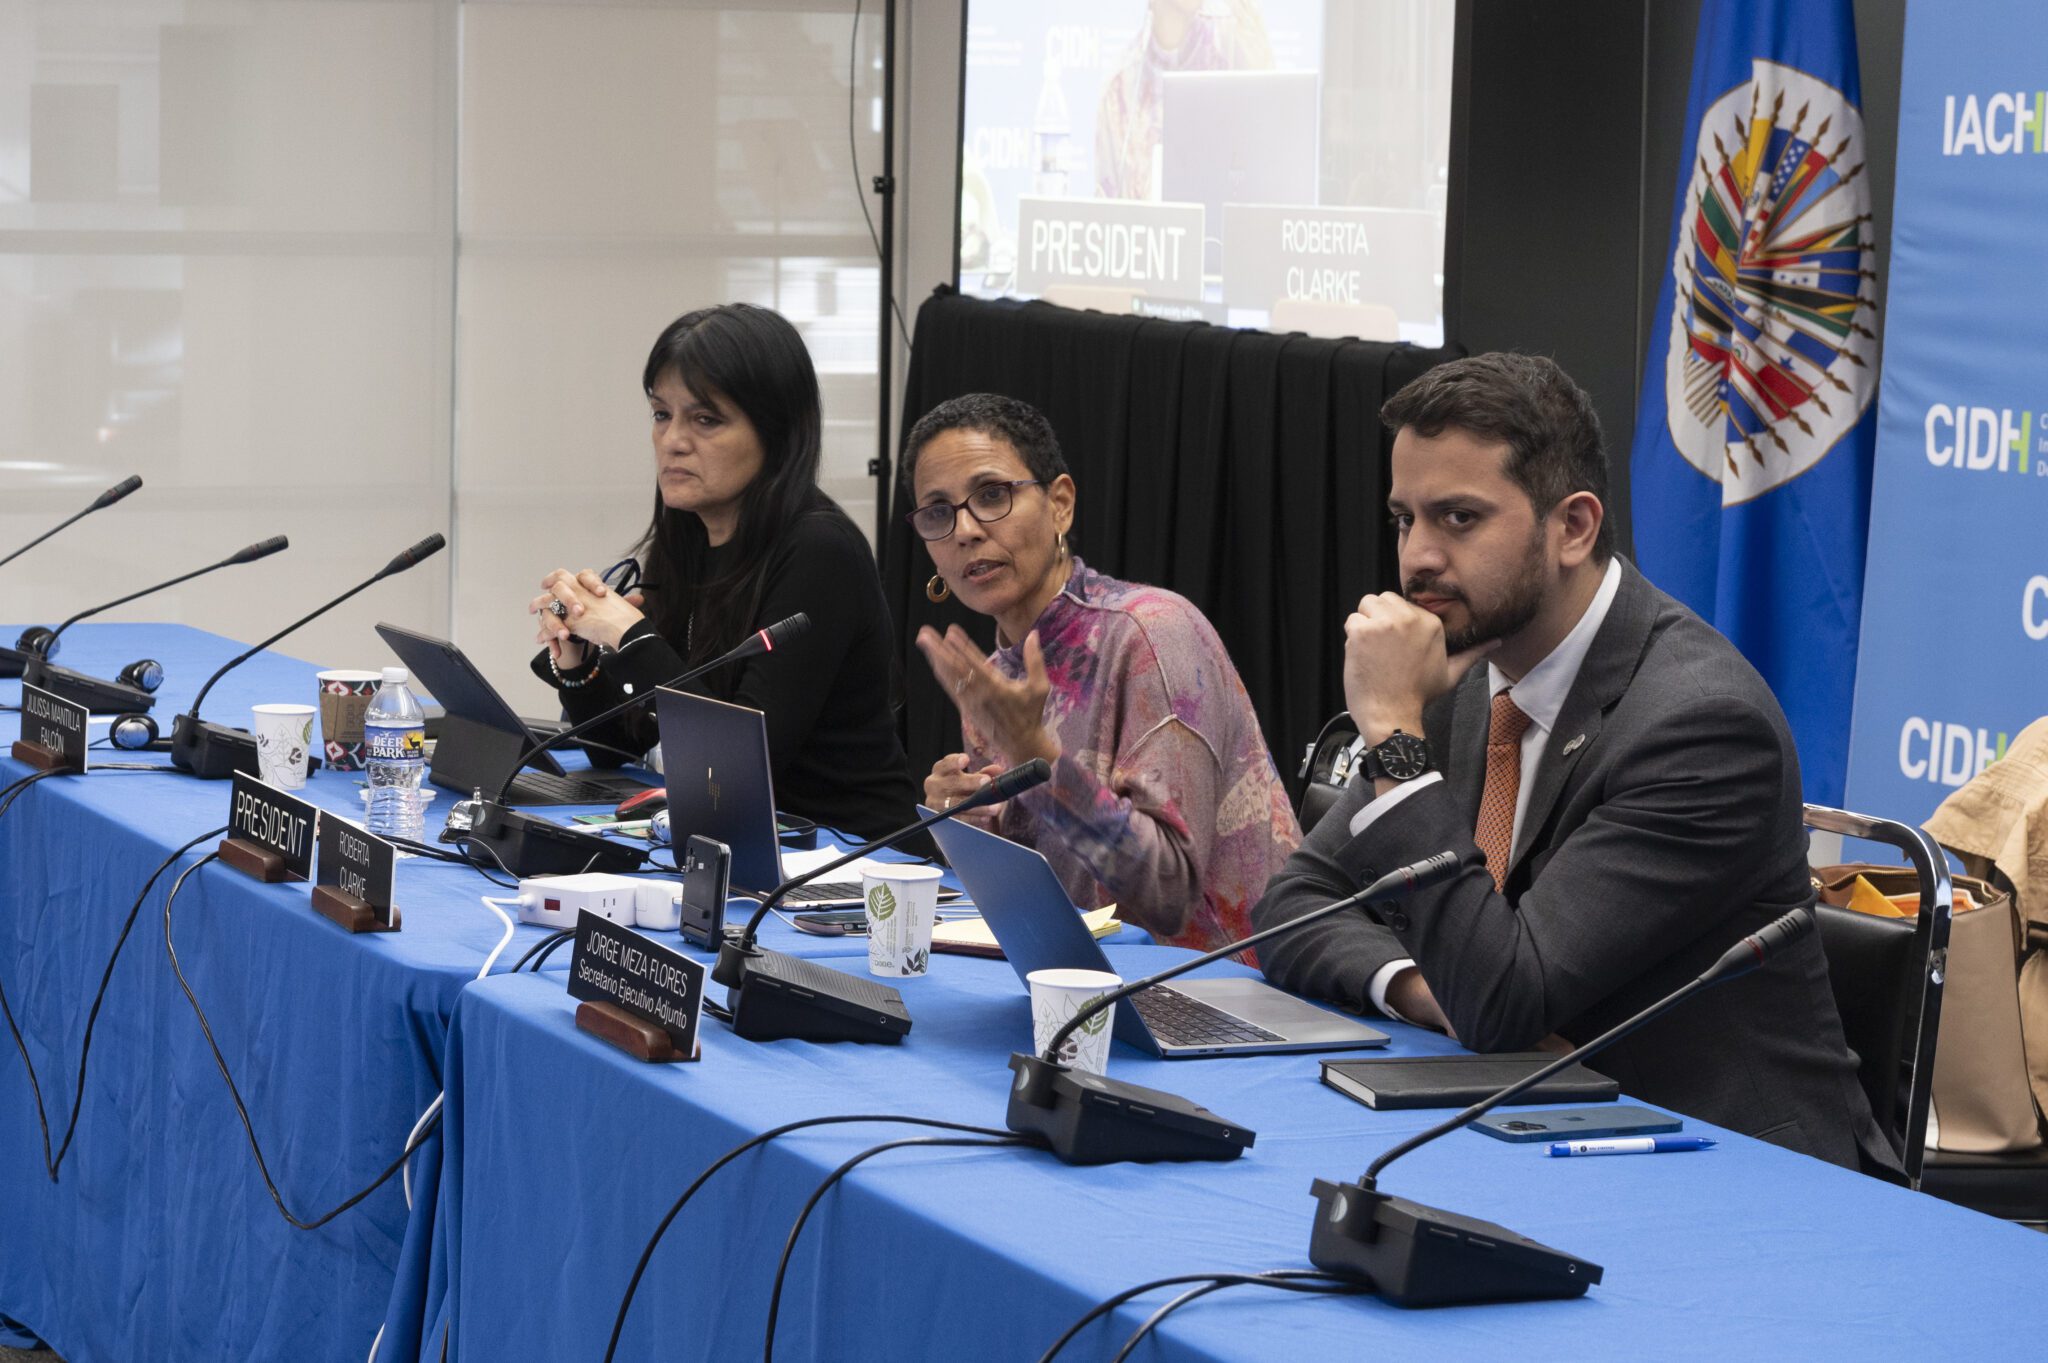 Three participants in the IACHR hearing sit at a table behind laptops and microphones. One woman is speaking and gesturing toward the viewer.